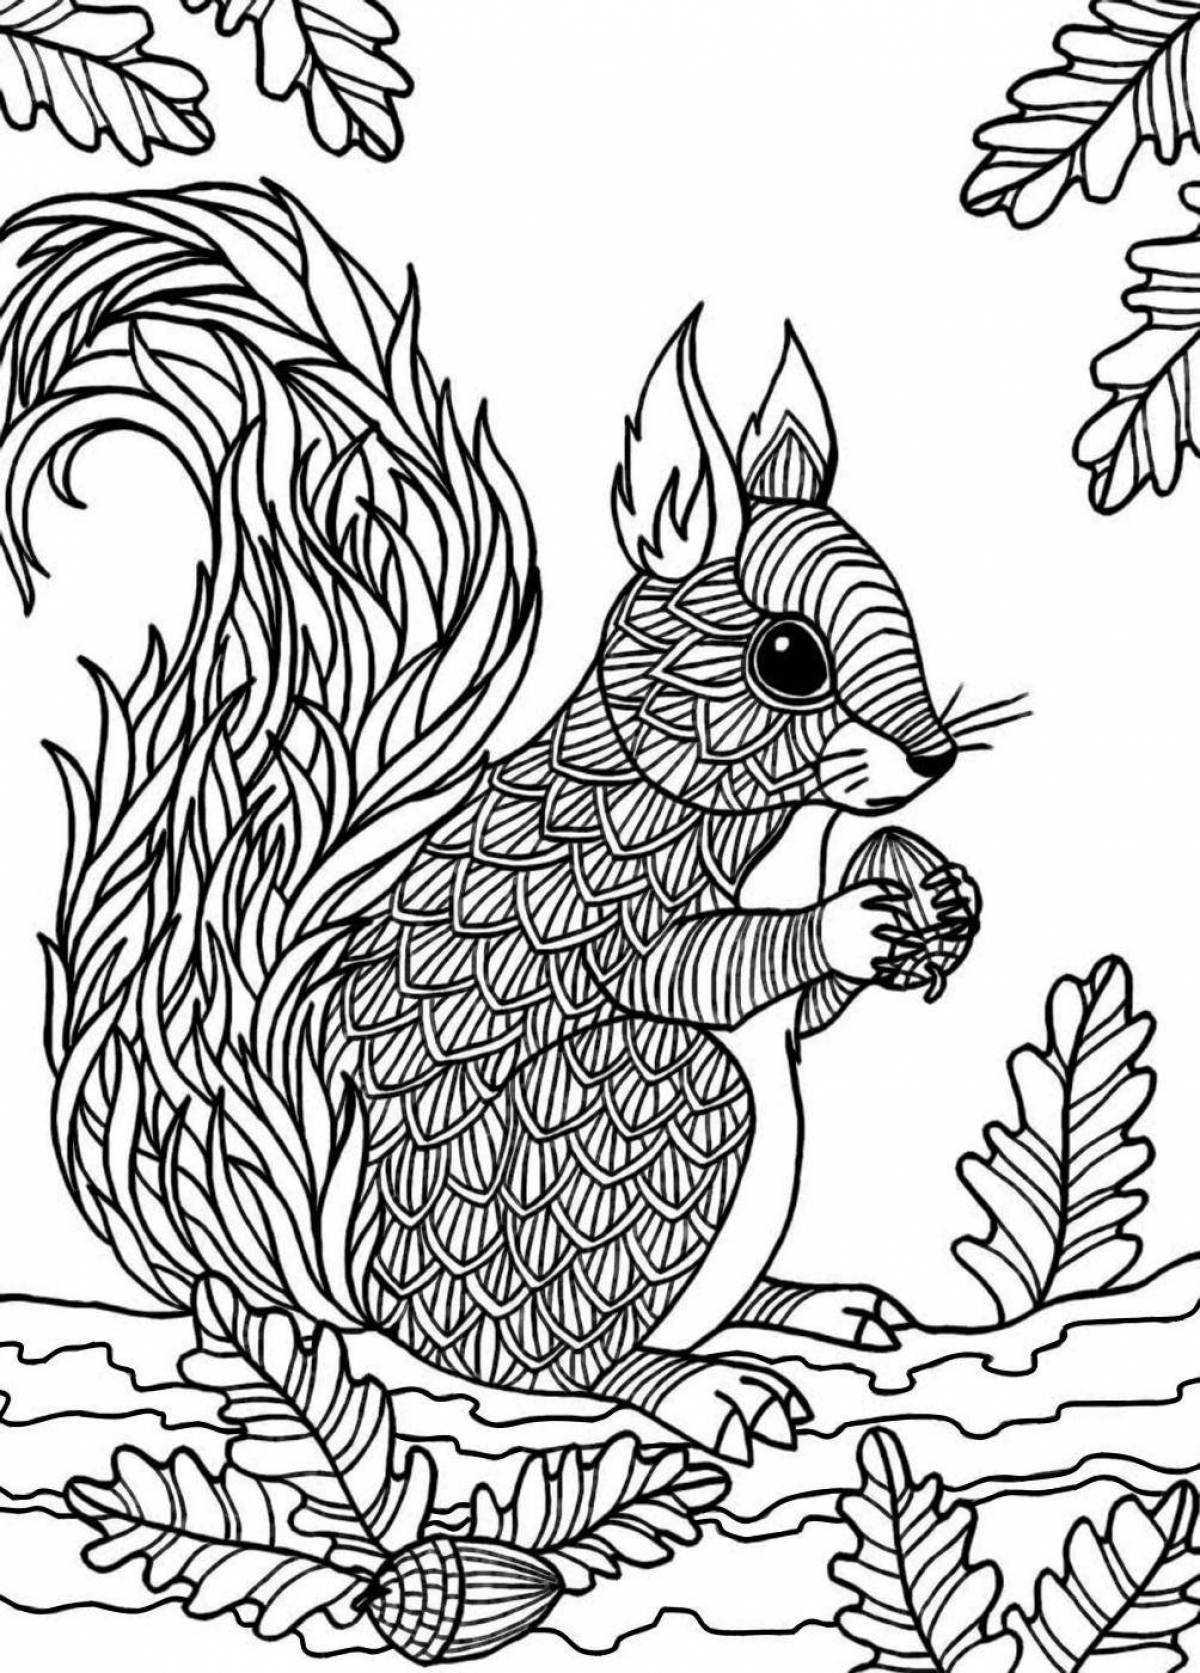 Shiny Russian animal coloring book